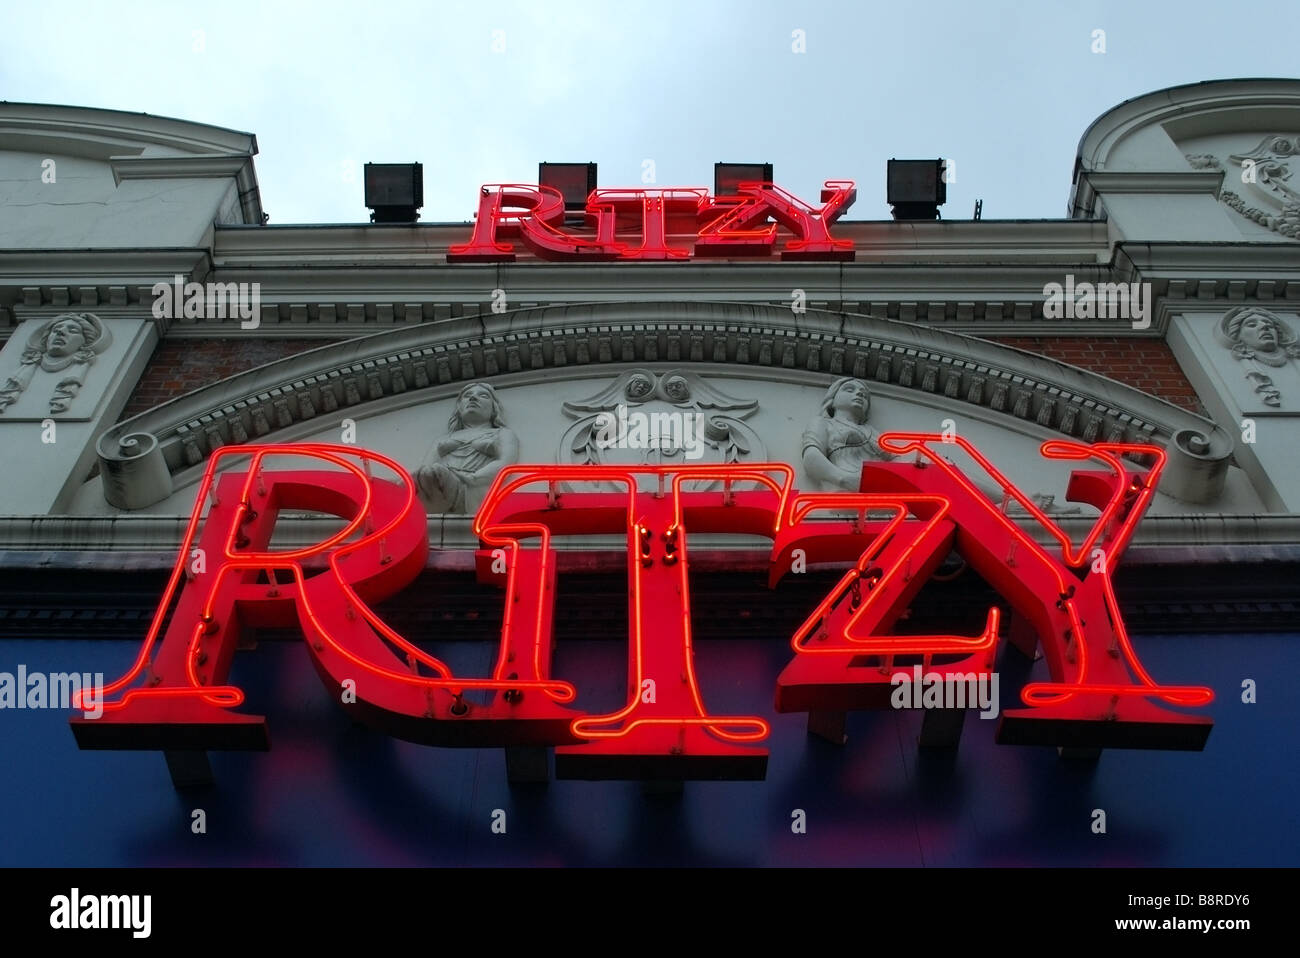 Ritzy neon light sign at entrance to The Electric Pavilion, The Pullman Cinema commonly known as Ritzy cinema in Brixton, London Stock Photo